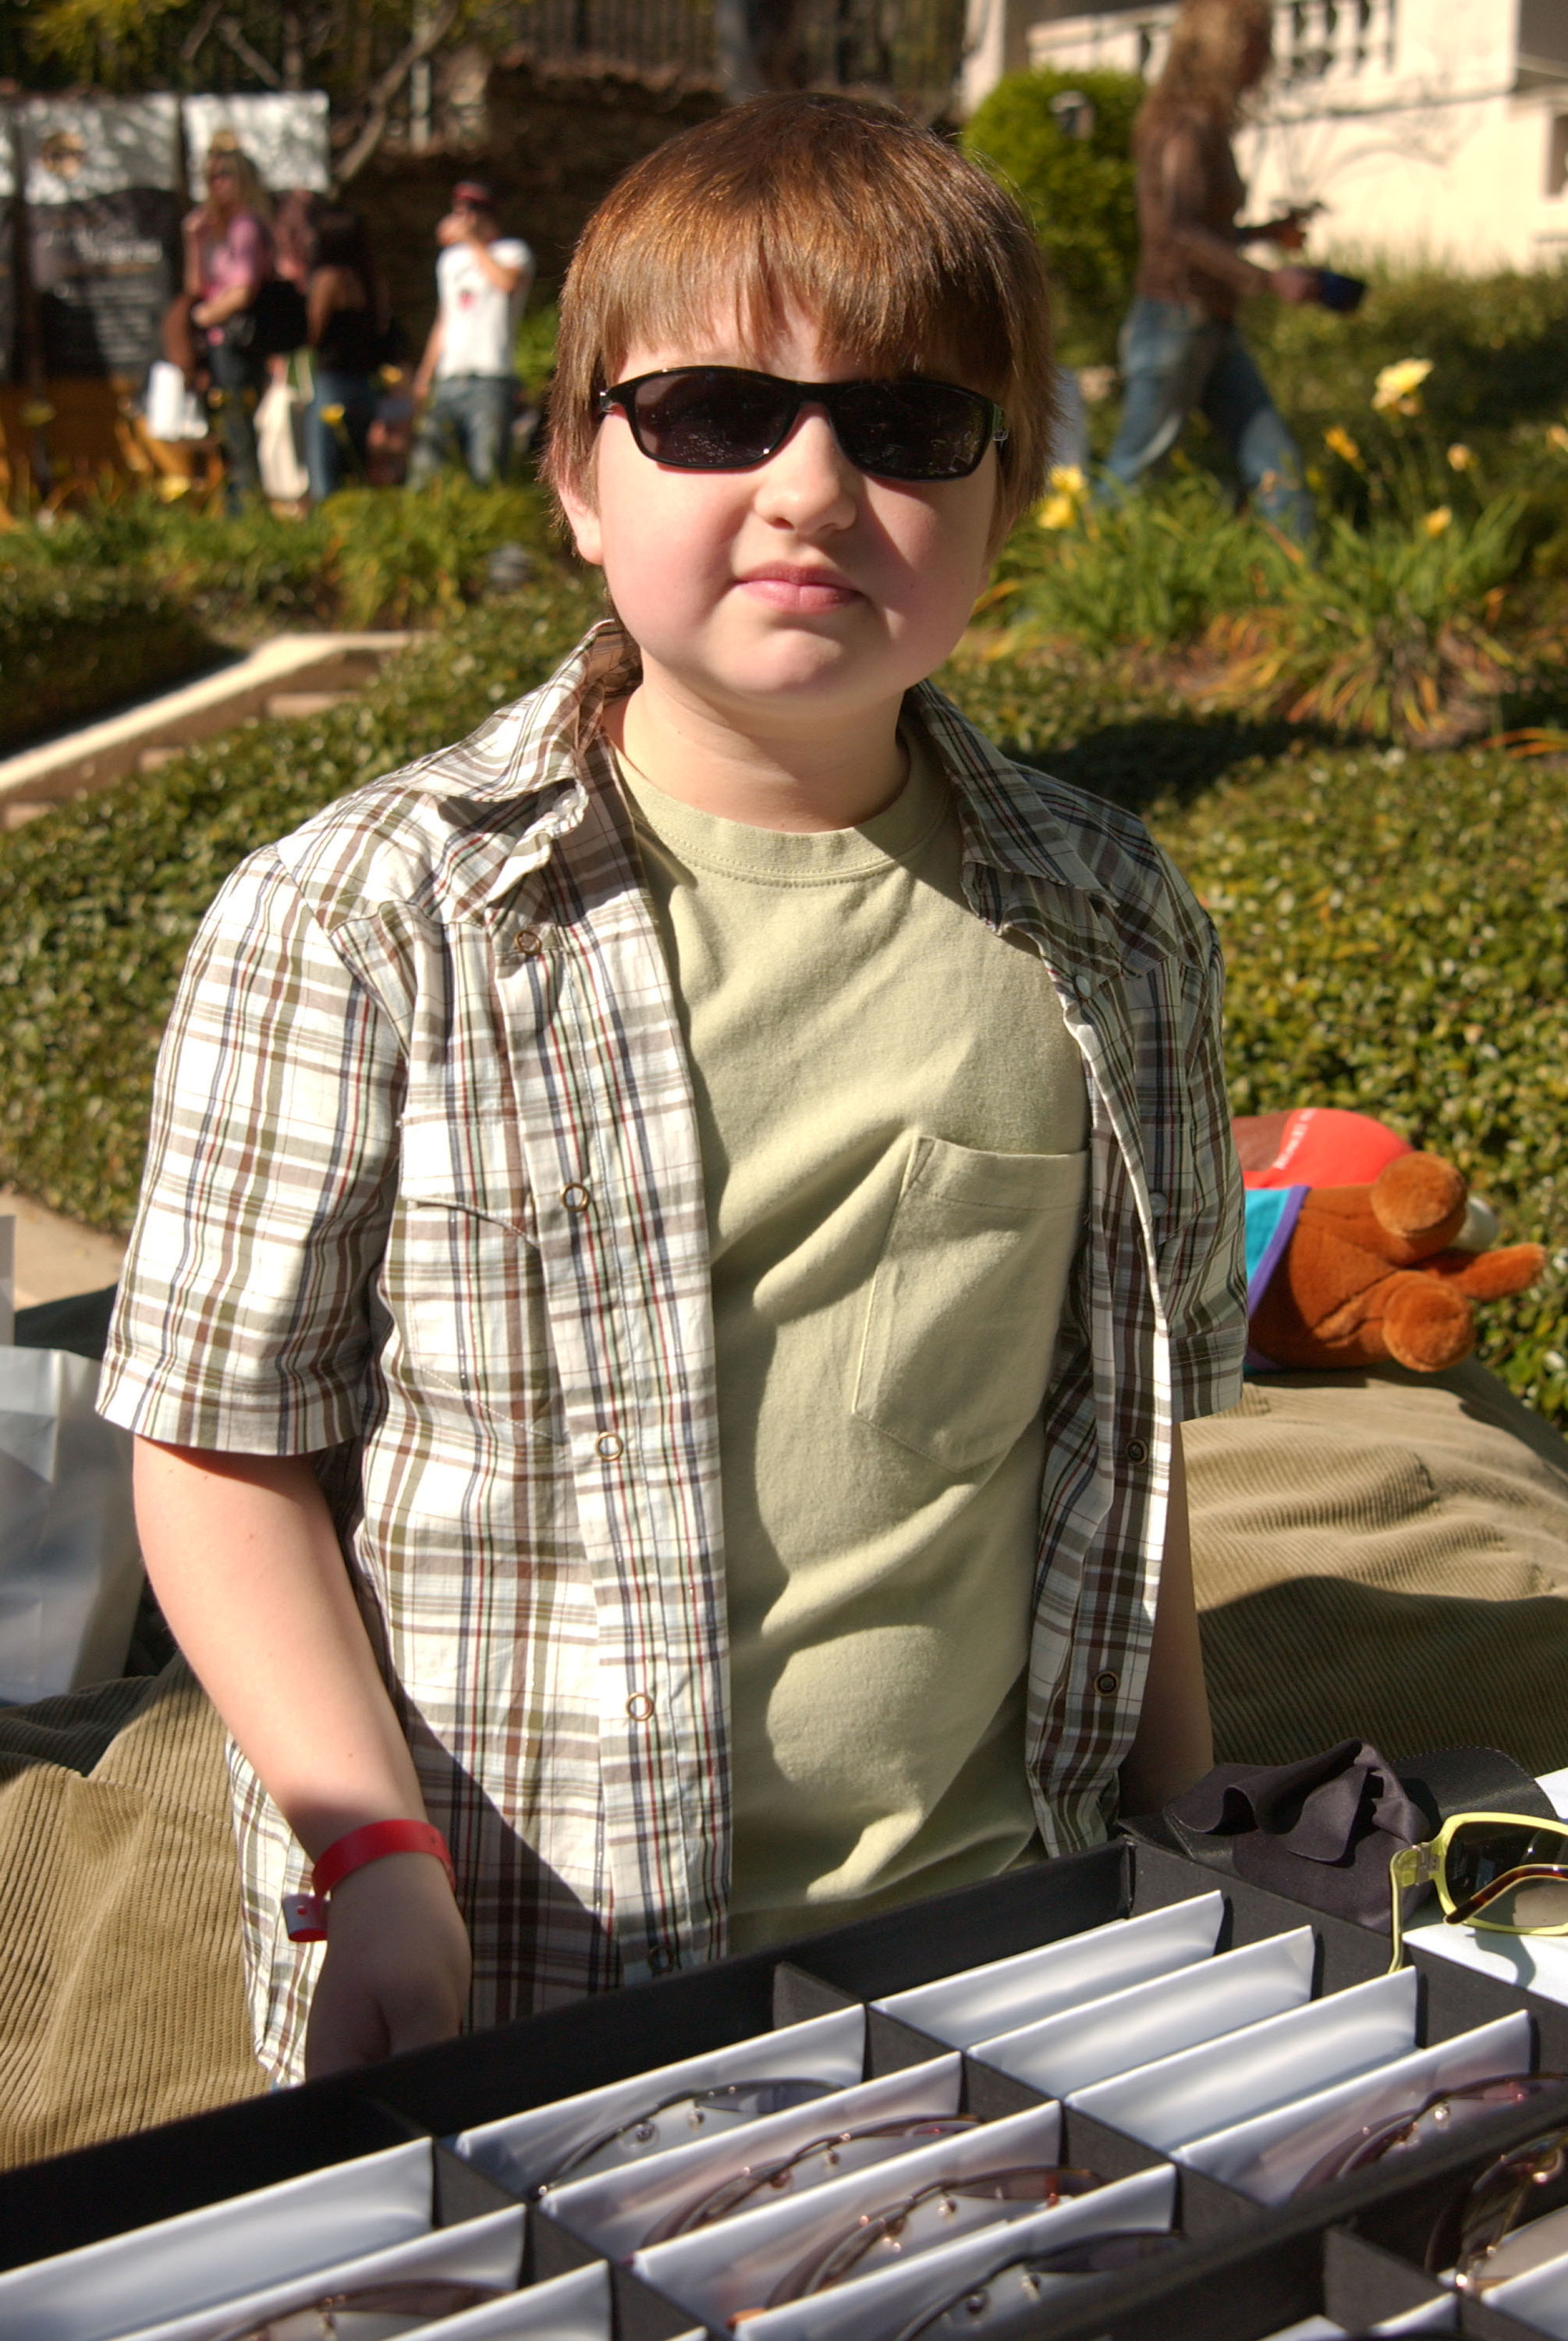 Angus T. Jones in Los Angeles in 2005 | Source: Getty Images